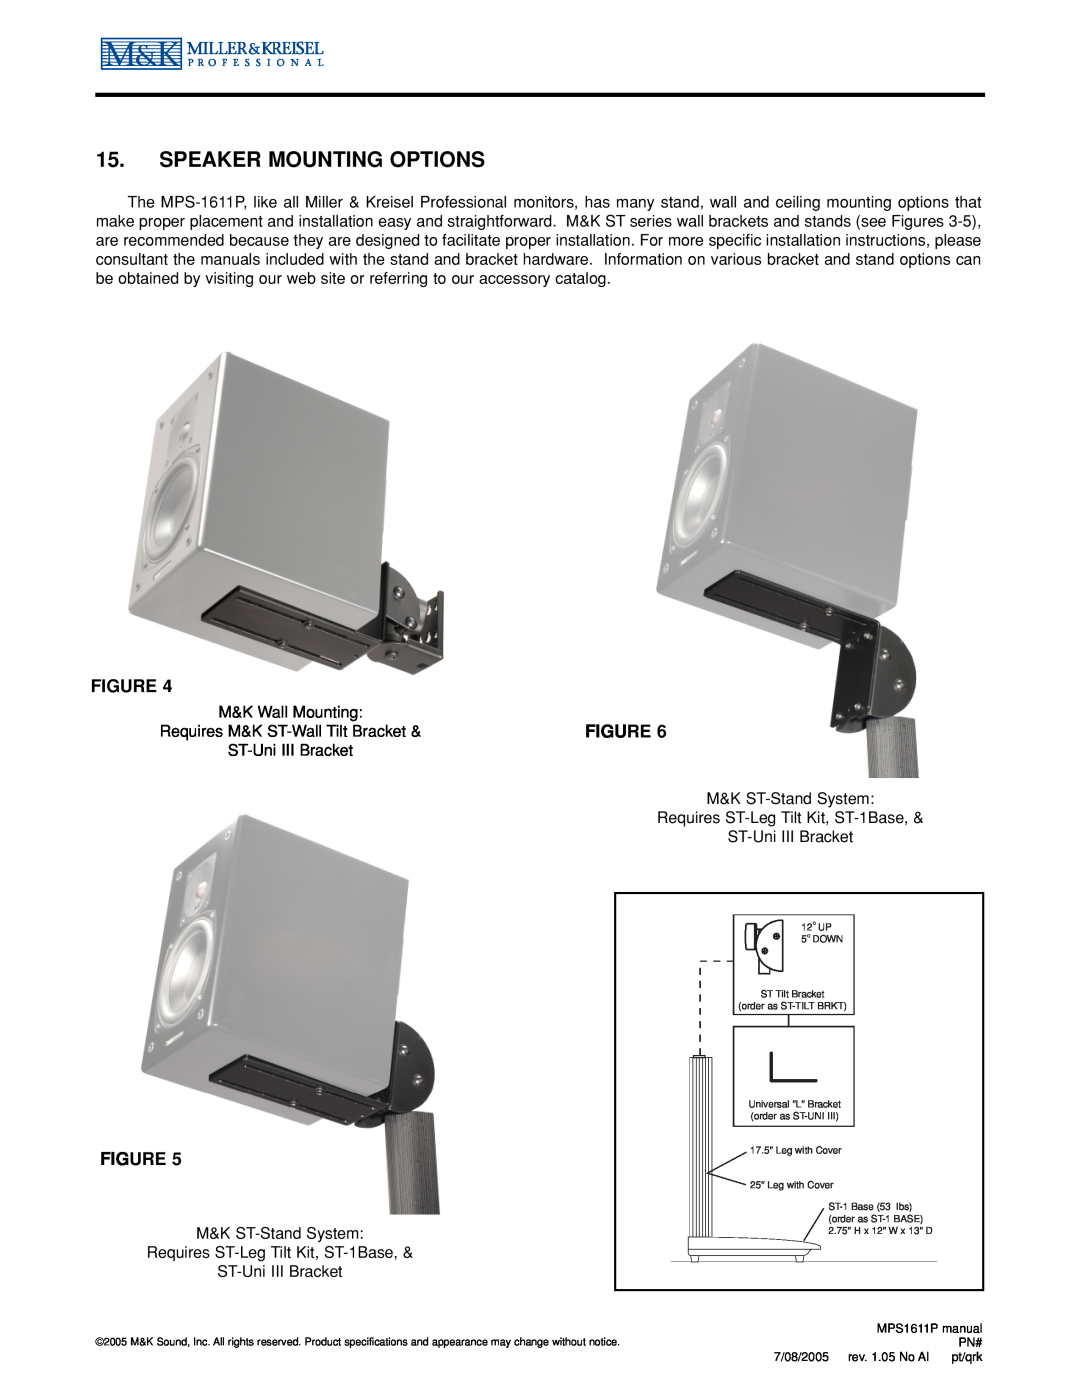 MK Sound MPS-1611P operation manual Speaker Mounting Options 